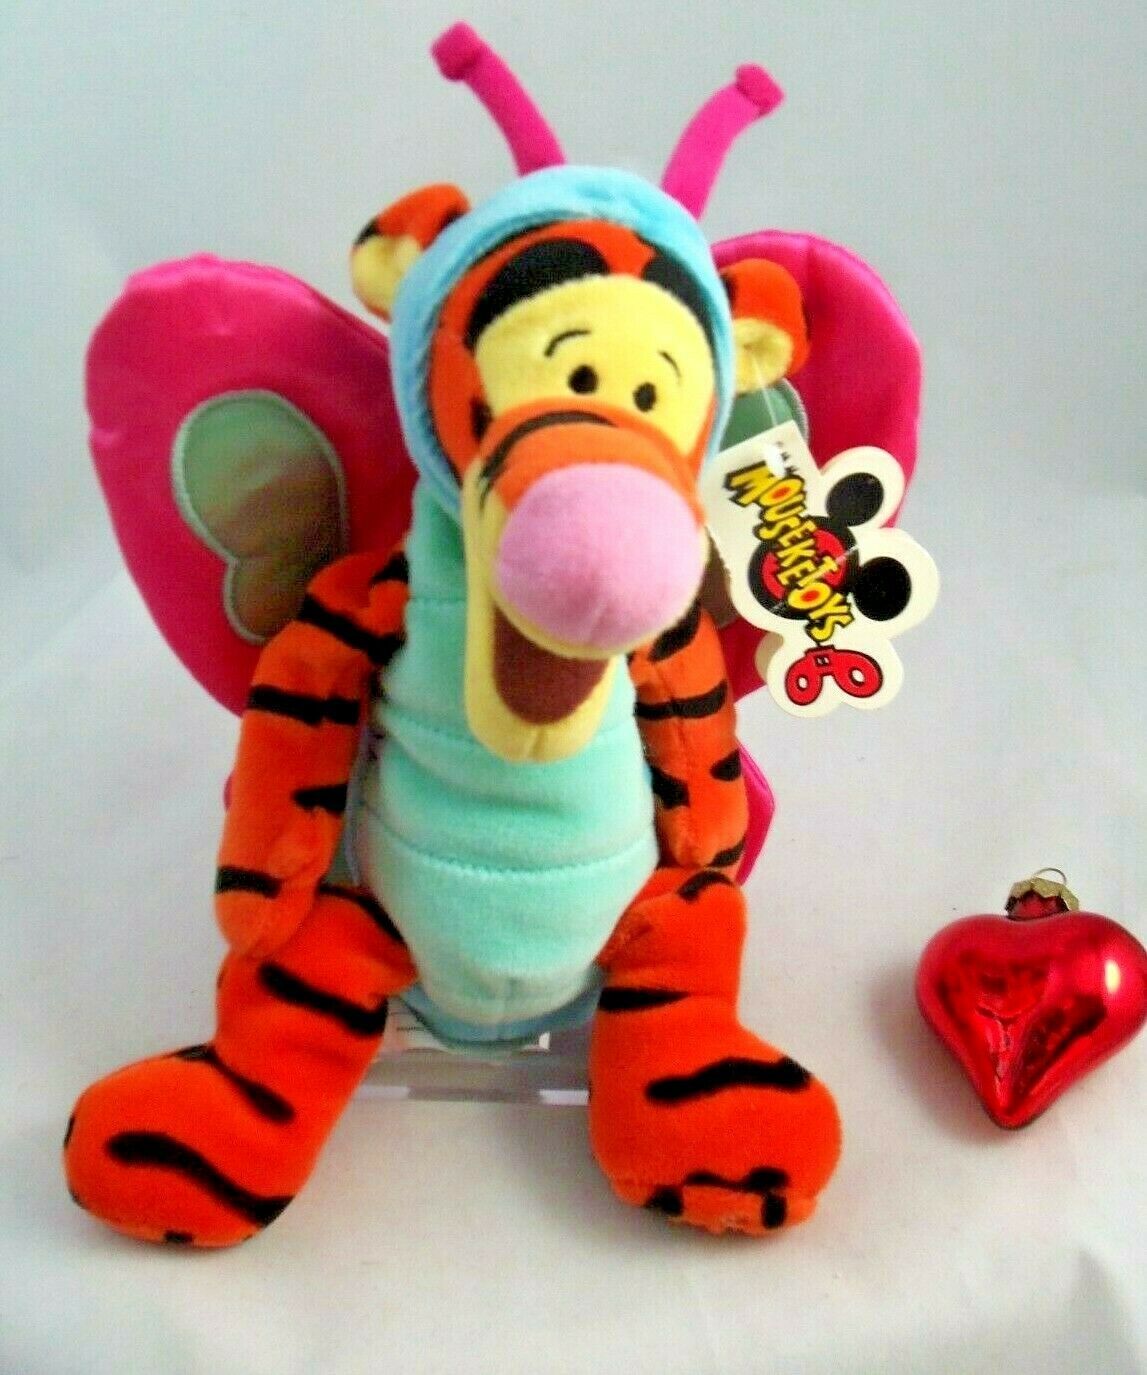 Disney 9" Tigger Butterfly  Bean Bag Plush -  2000, Easter - New with Tag - $14.99